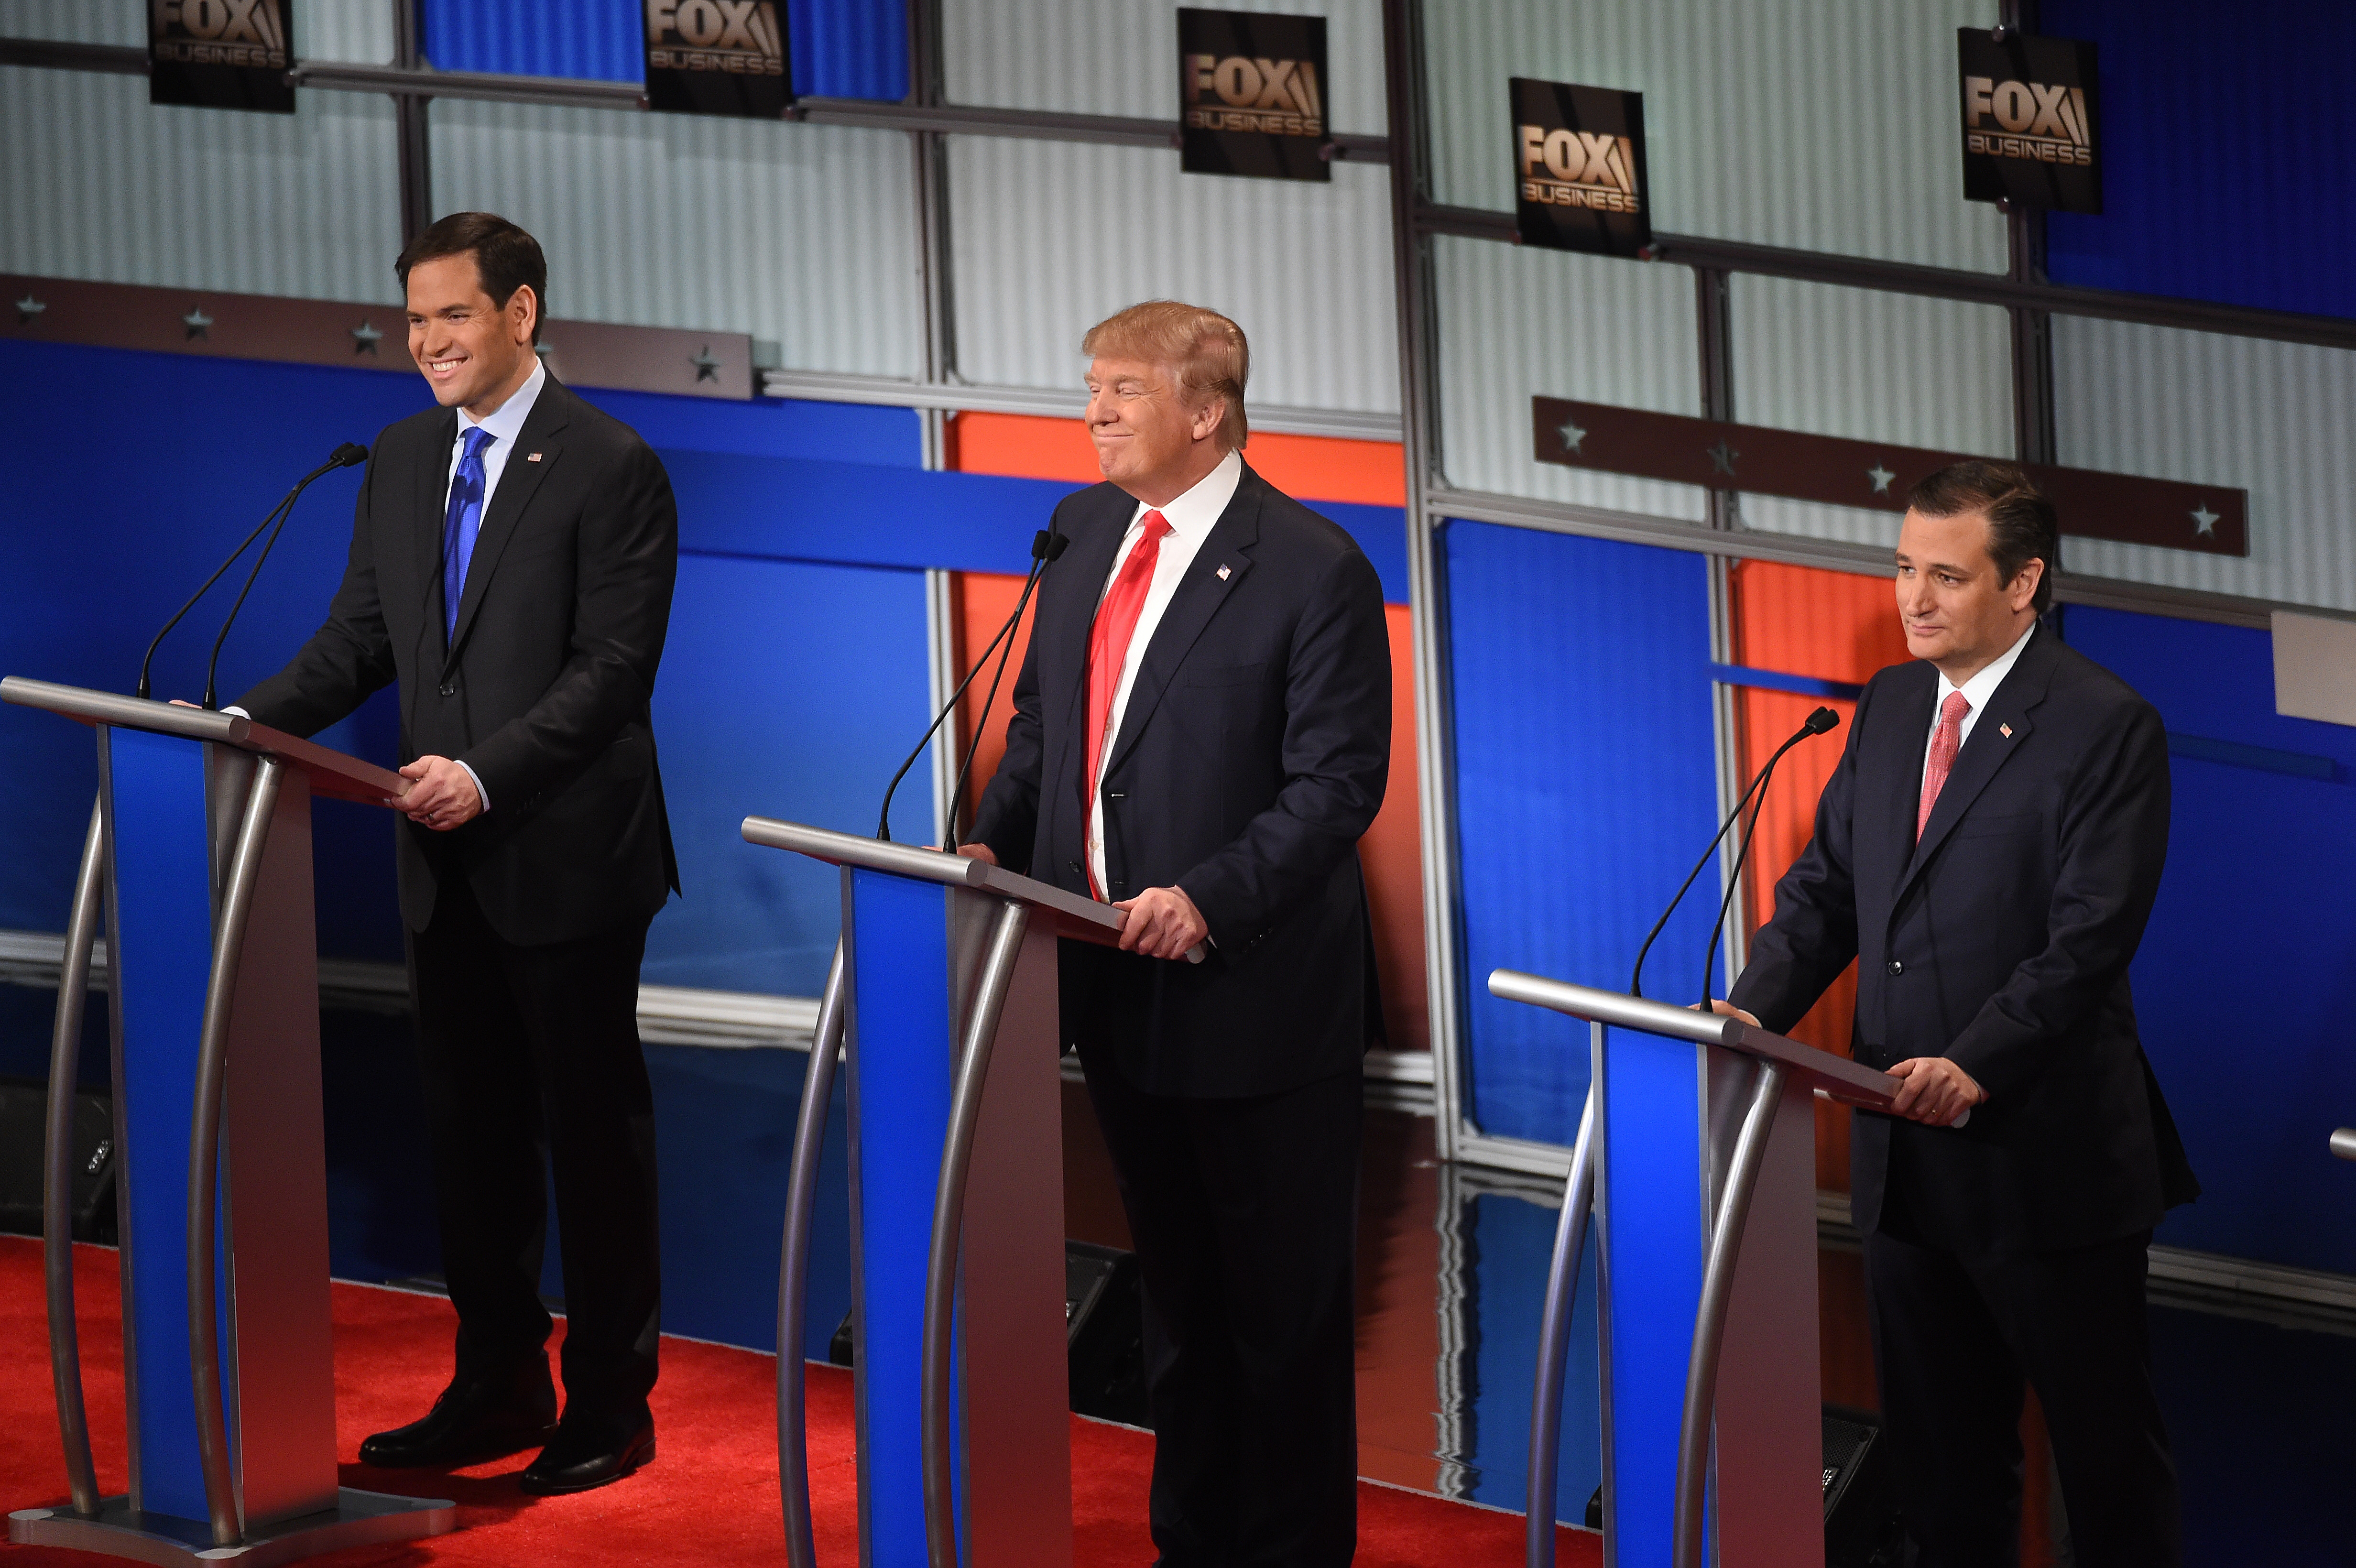 Marco Rubio, Donald Trump, and Ted Cruz continue campaigning for votes.